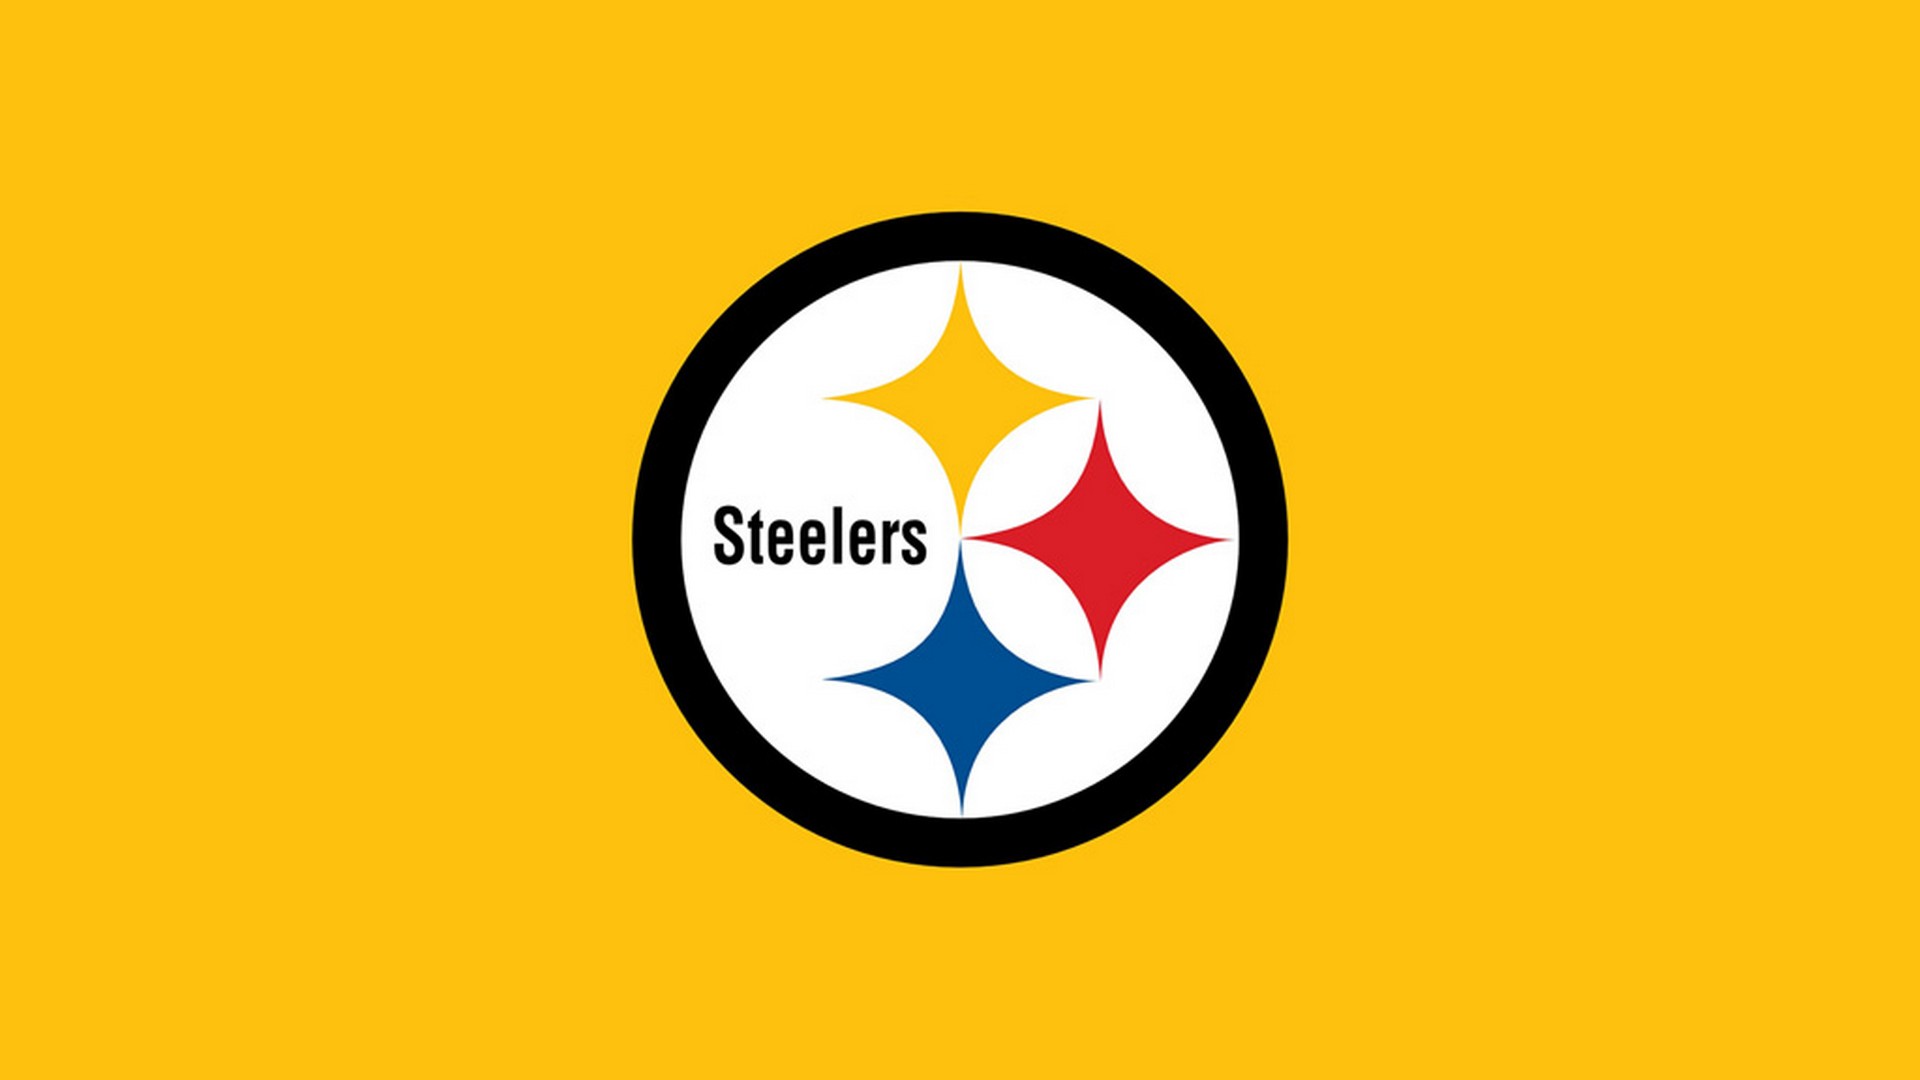 Windows Wallpaper Steelers Logo With Resolution 1920X1080 pixel. You can make this wallpaper for your Mac or Windows Desktop Background, iPhone, Android or Tablet and another Smartphone device for free